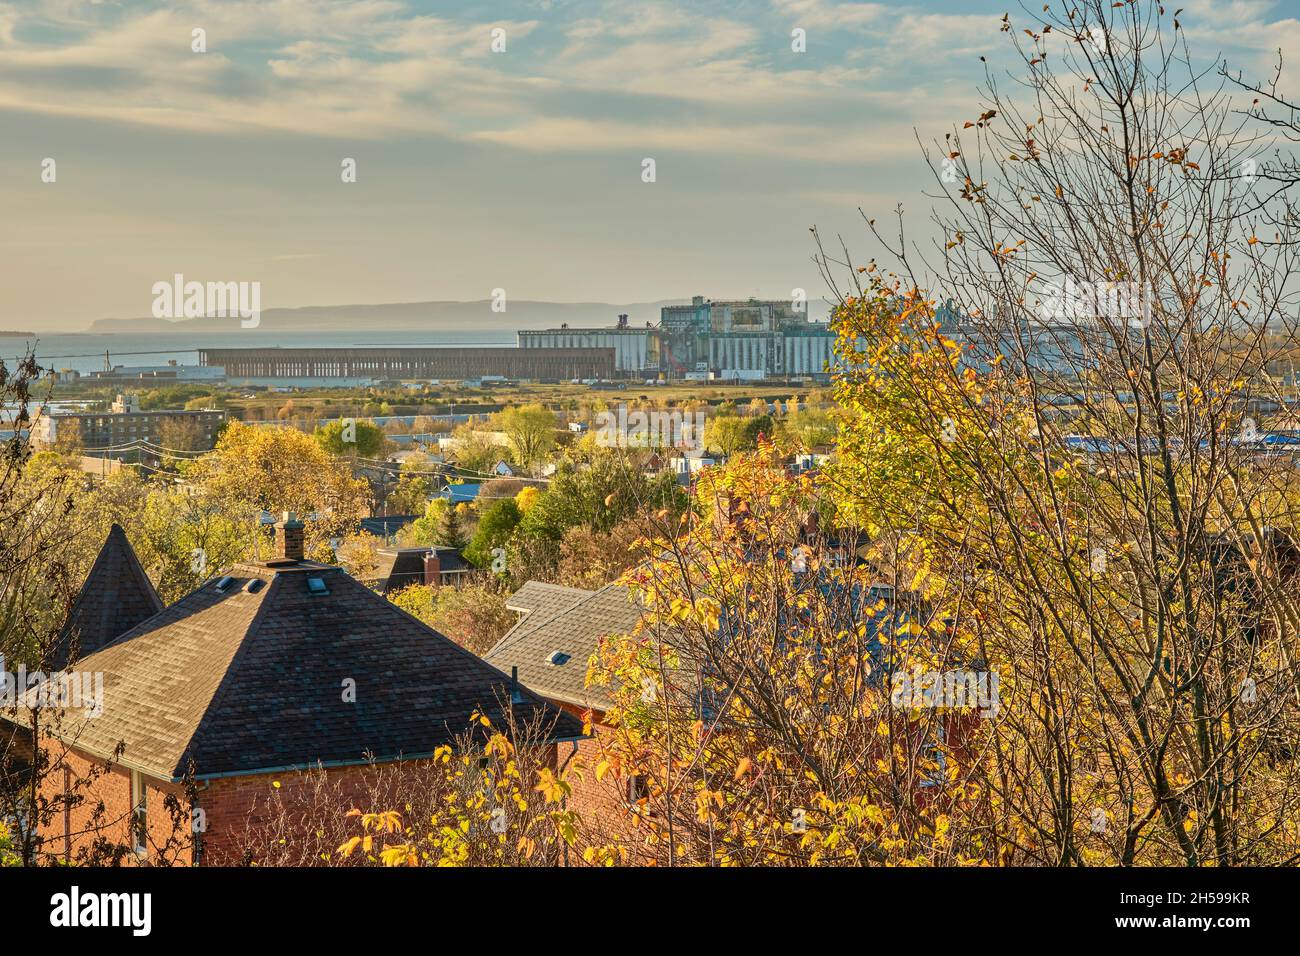 View of the City of Thunder Bay Ontario from Hillcrest Park with grain terminals and the Sleeping Giant in the background. Stock Photo